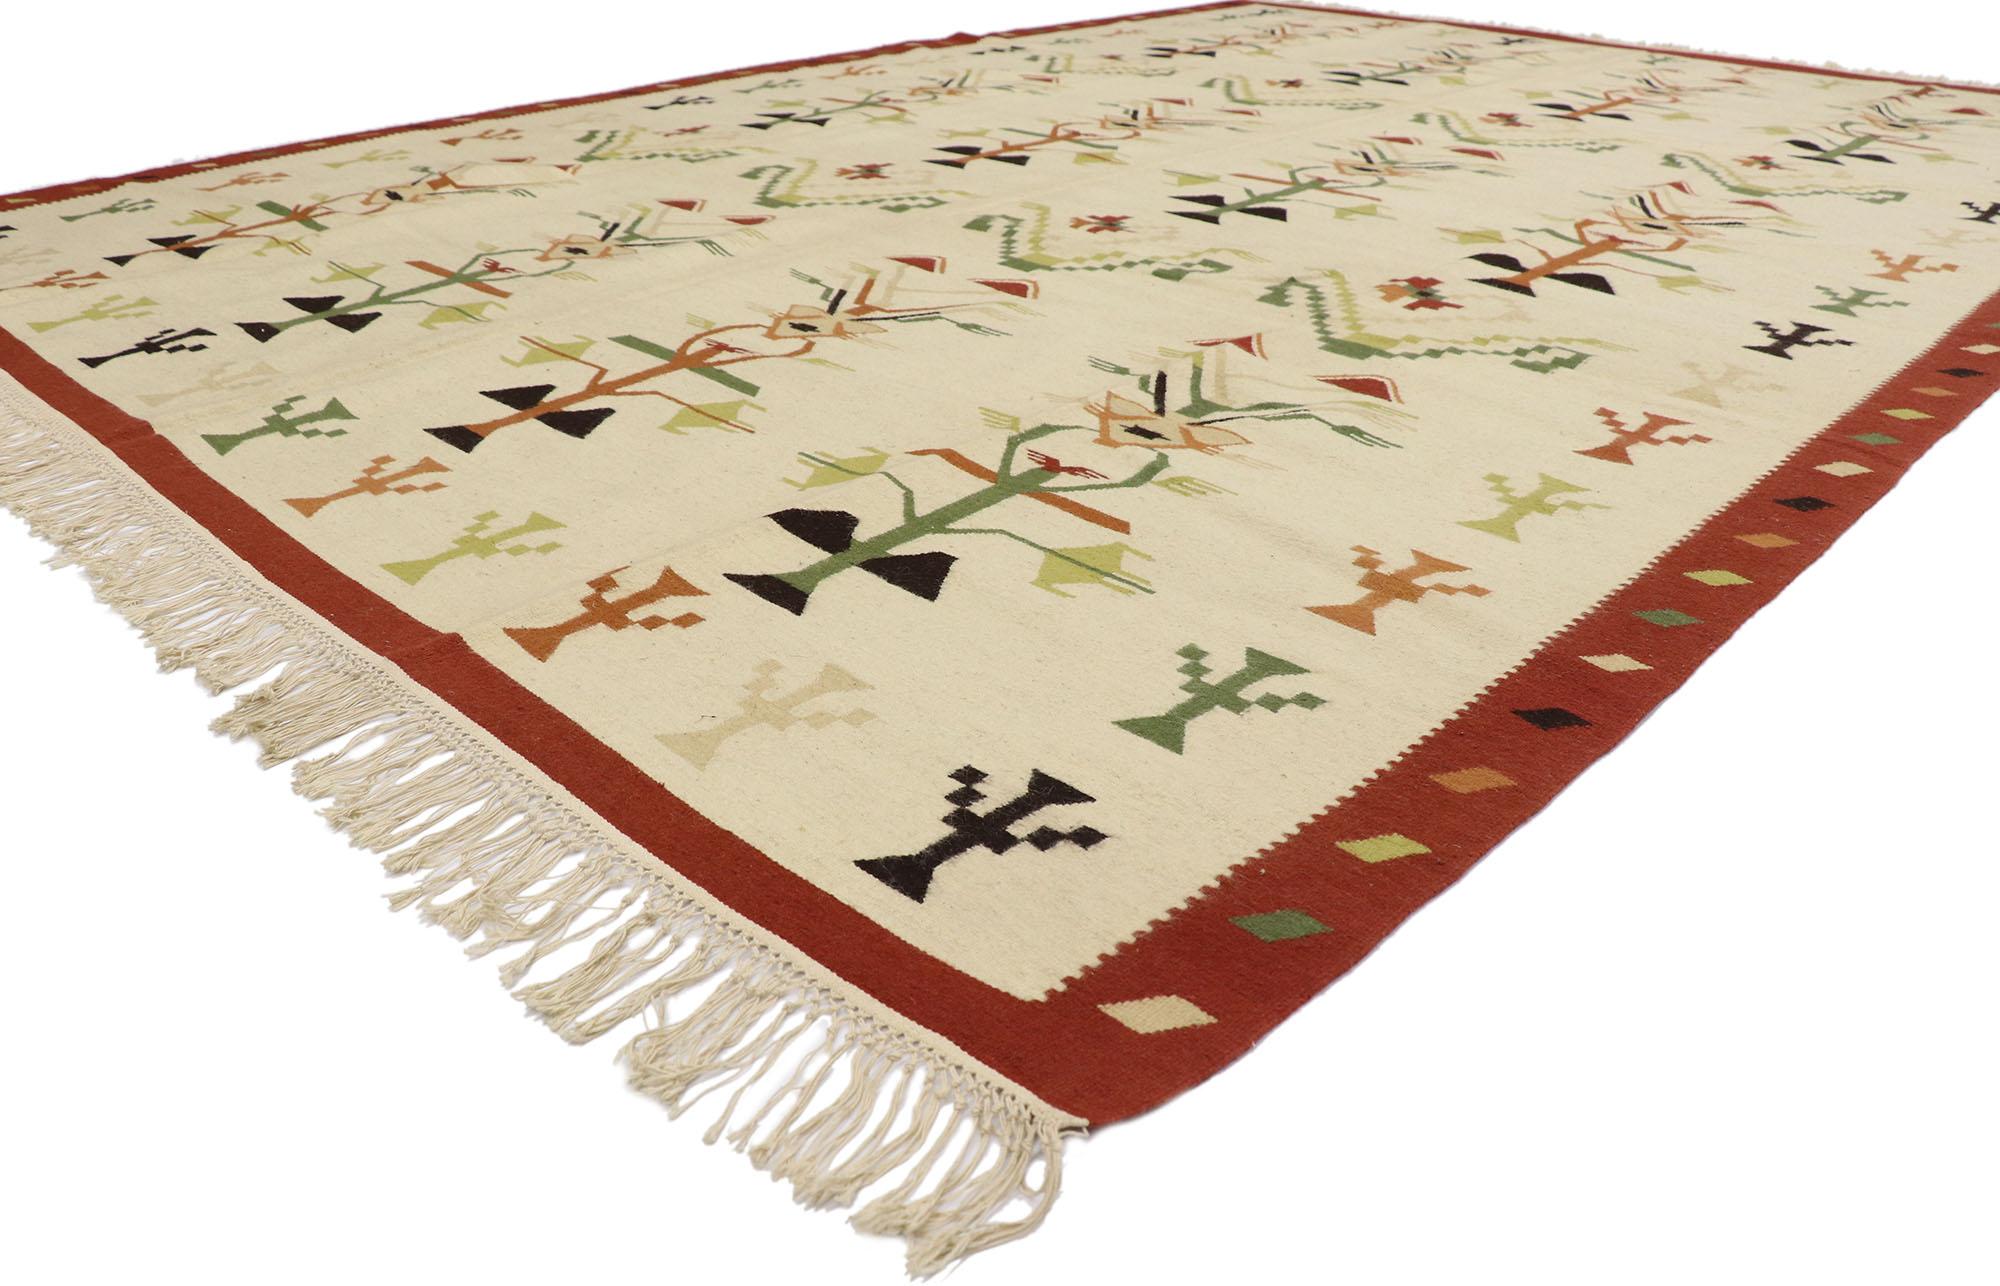 78014 Vintage Romanian Kilim rug with Folk Art Biophilic Design 08'09 x 12'00.?? Full of tiny details and reflecting elements of nature, this hand-woven wool vintage Romanian kilim rug is a captivating vision of woven beauty. The abrashed beige